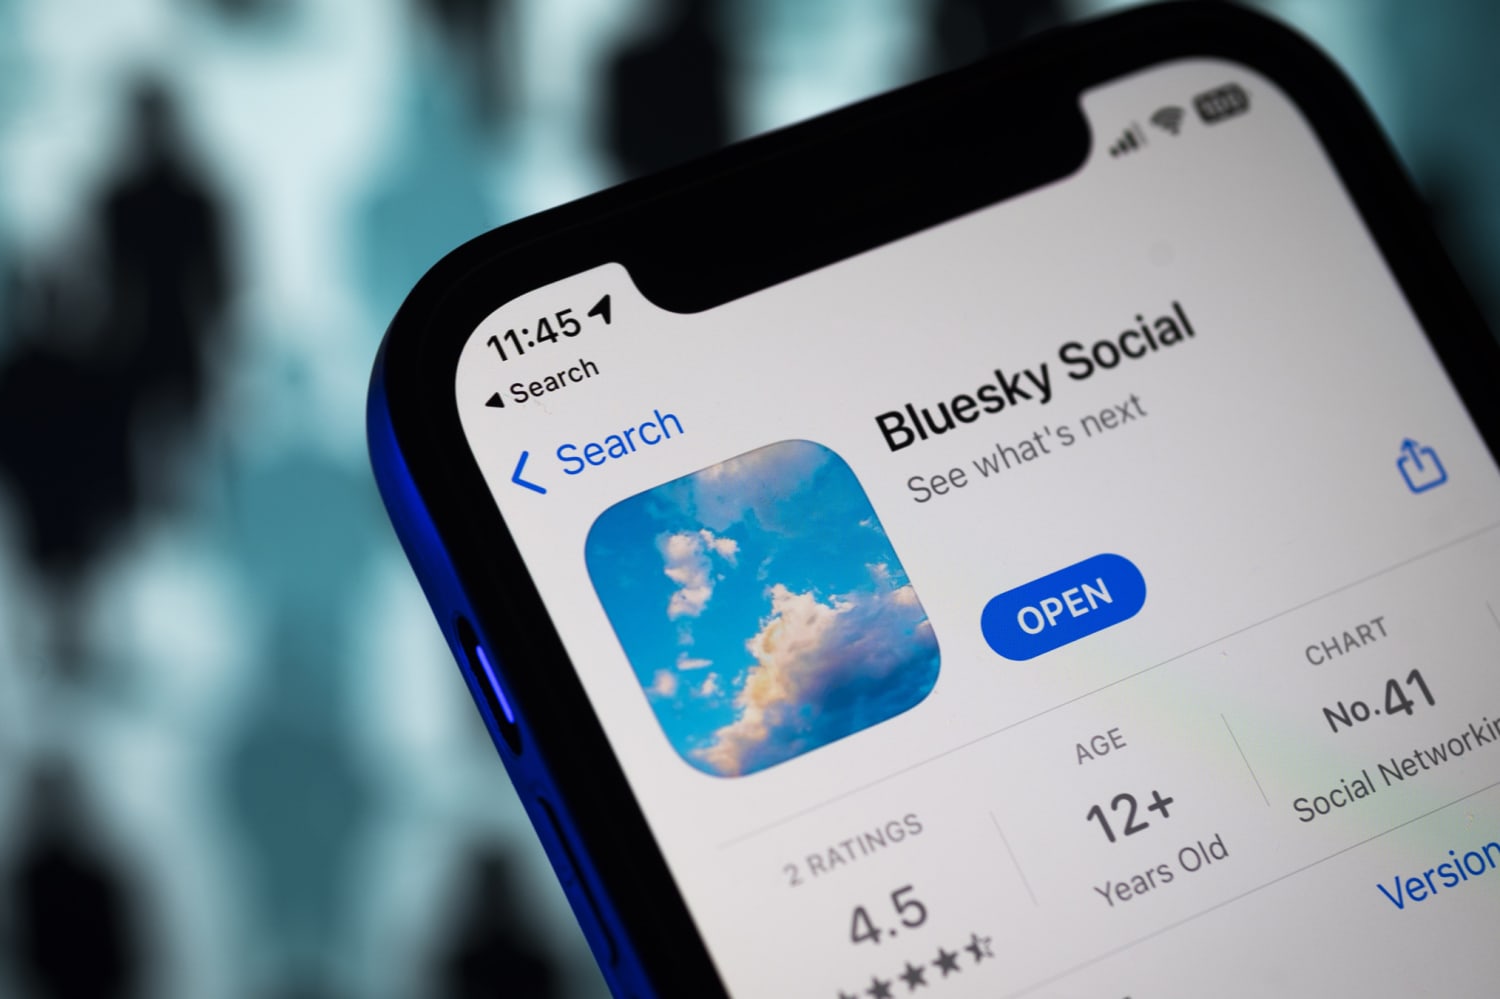 Bluesky Empowering Users to Curate their Social Media Experience